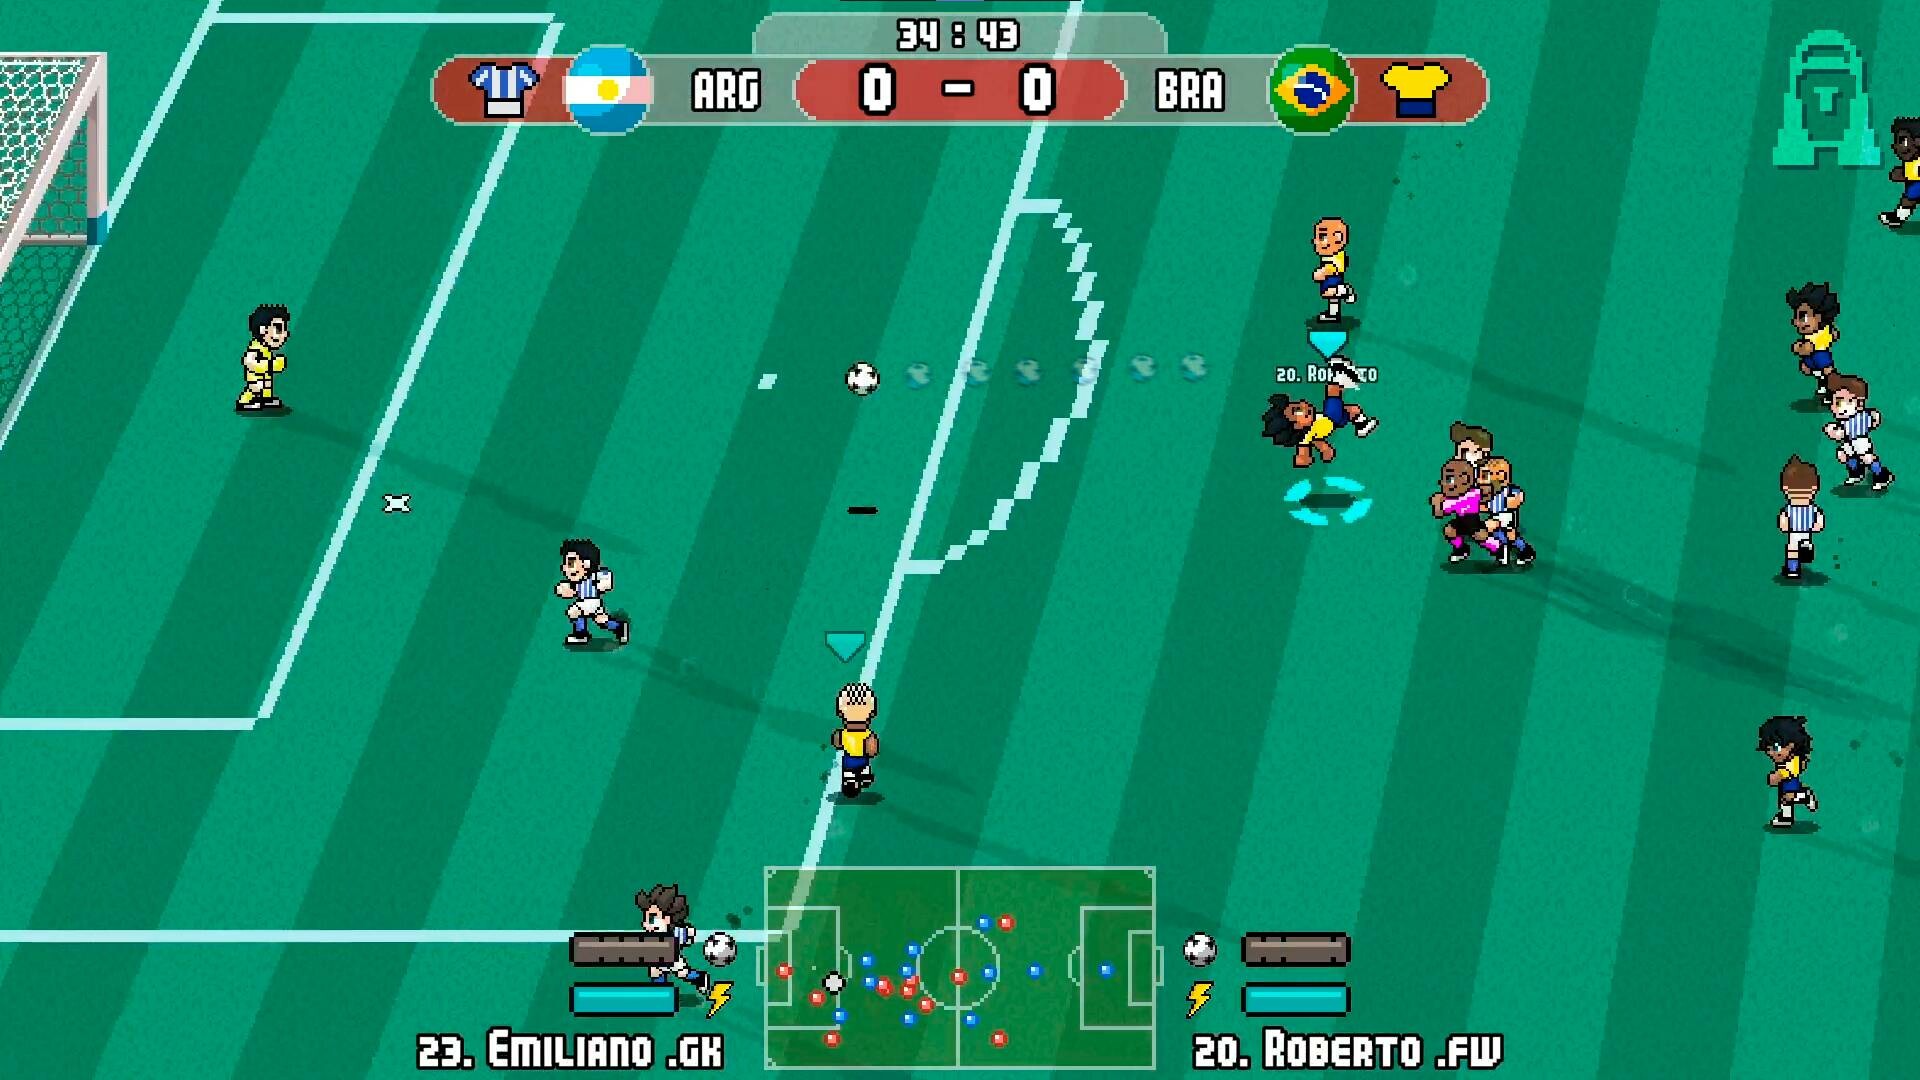 Find the best laptops for Pixel Cup Soccer